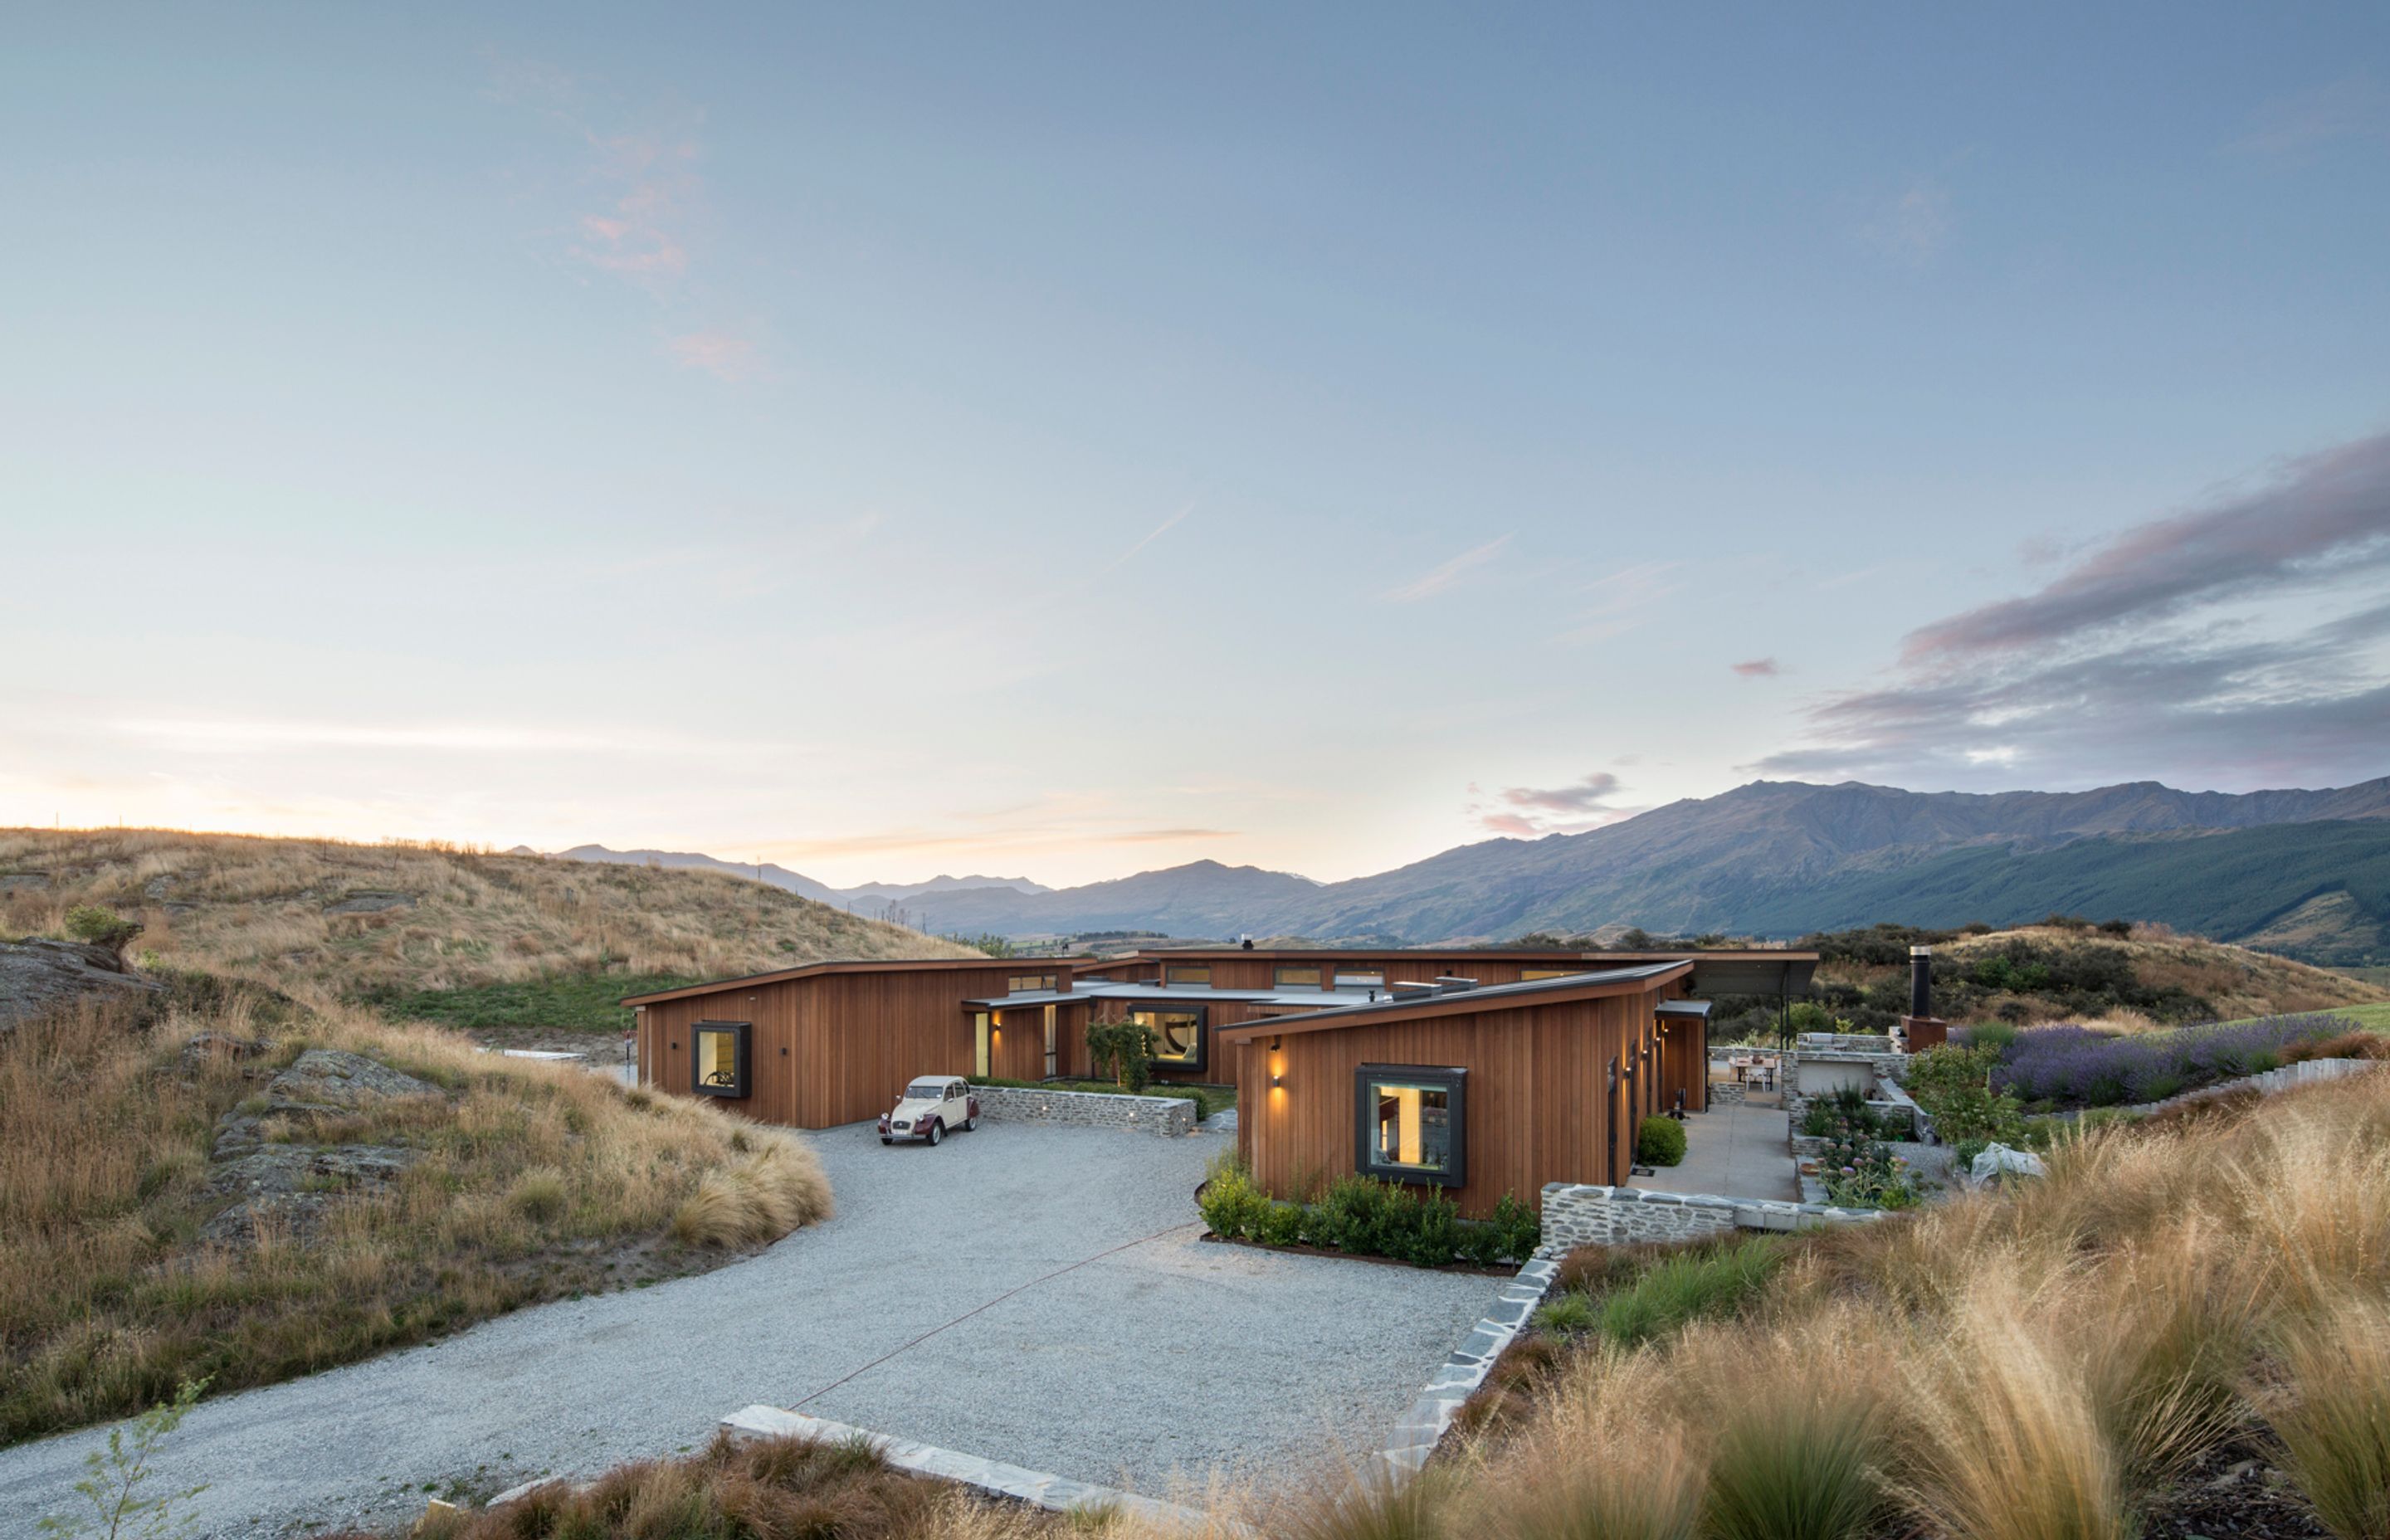 Nestled into an idyllic rural property—part of a new development near Arrowtown—this family home is only revealed as you approach it around a rocky outcrop.